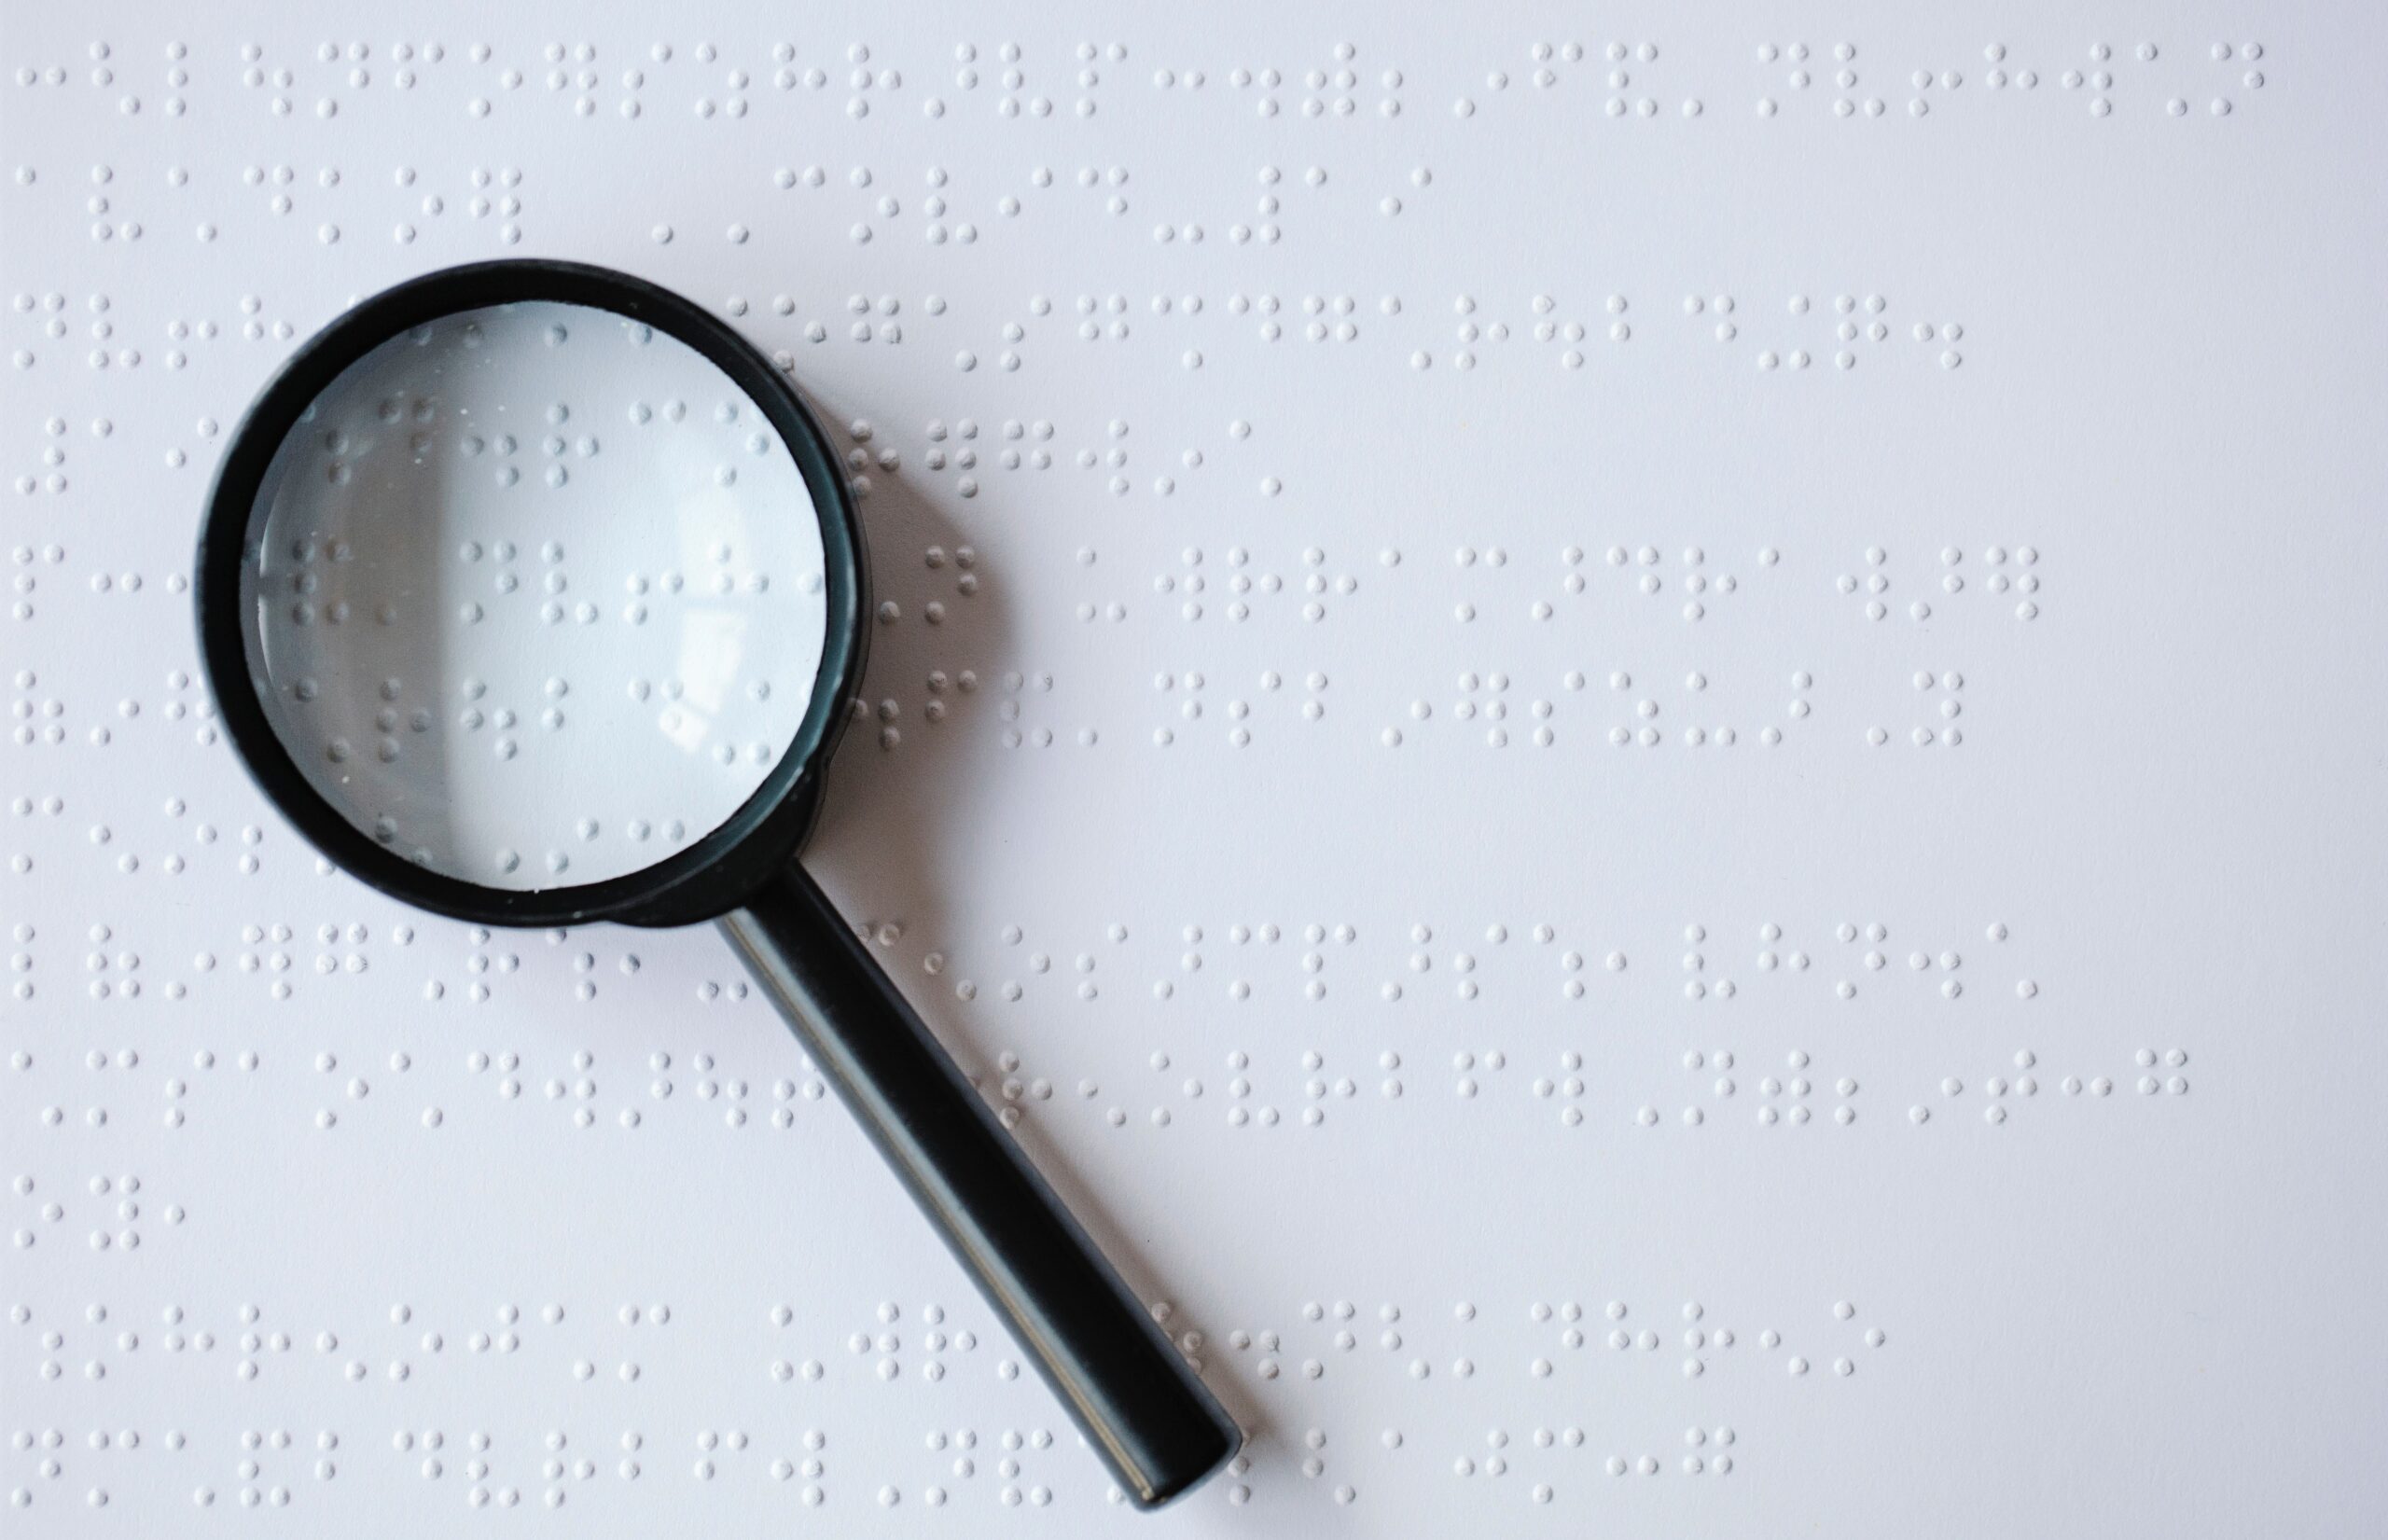 A white paper sheet with Braille inscriptions is showing through a simple back magnifying glass.